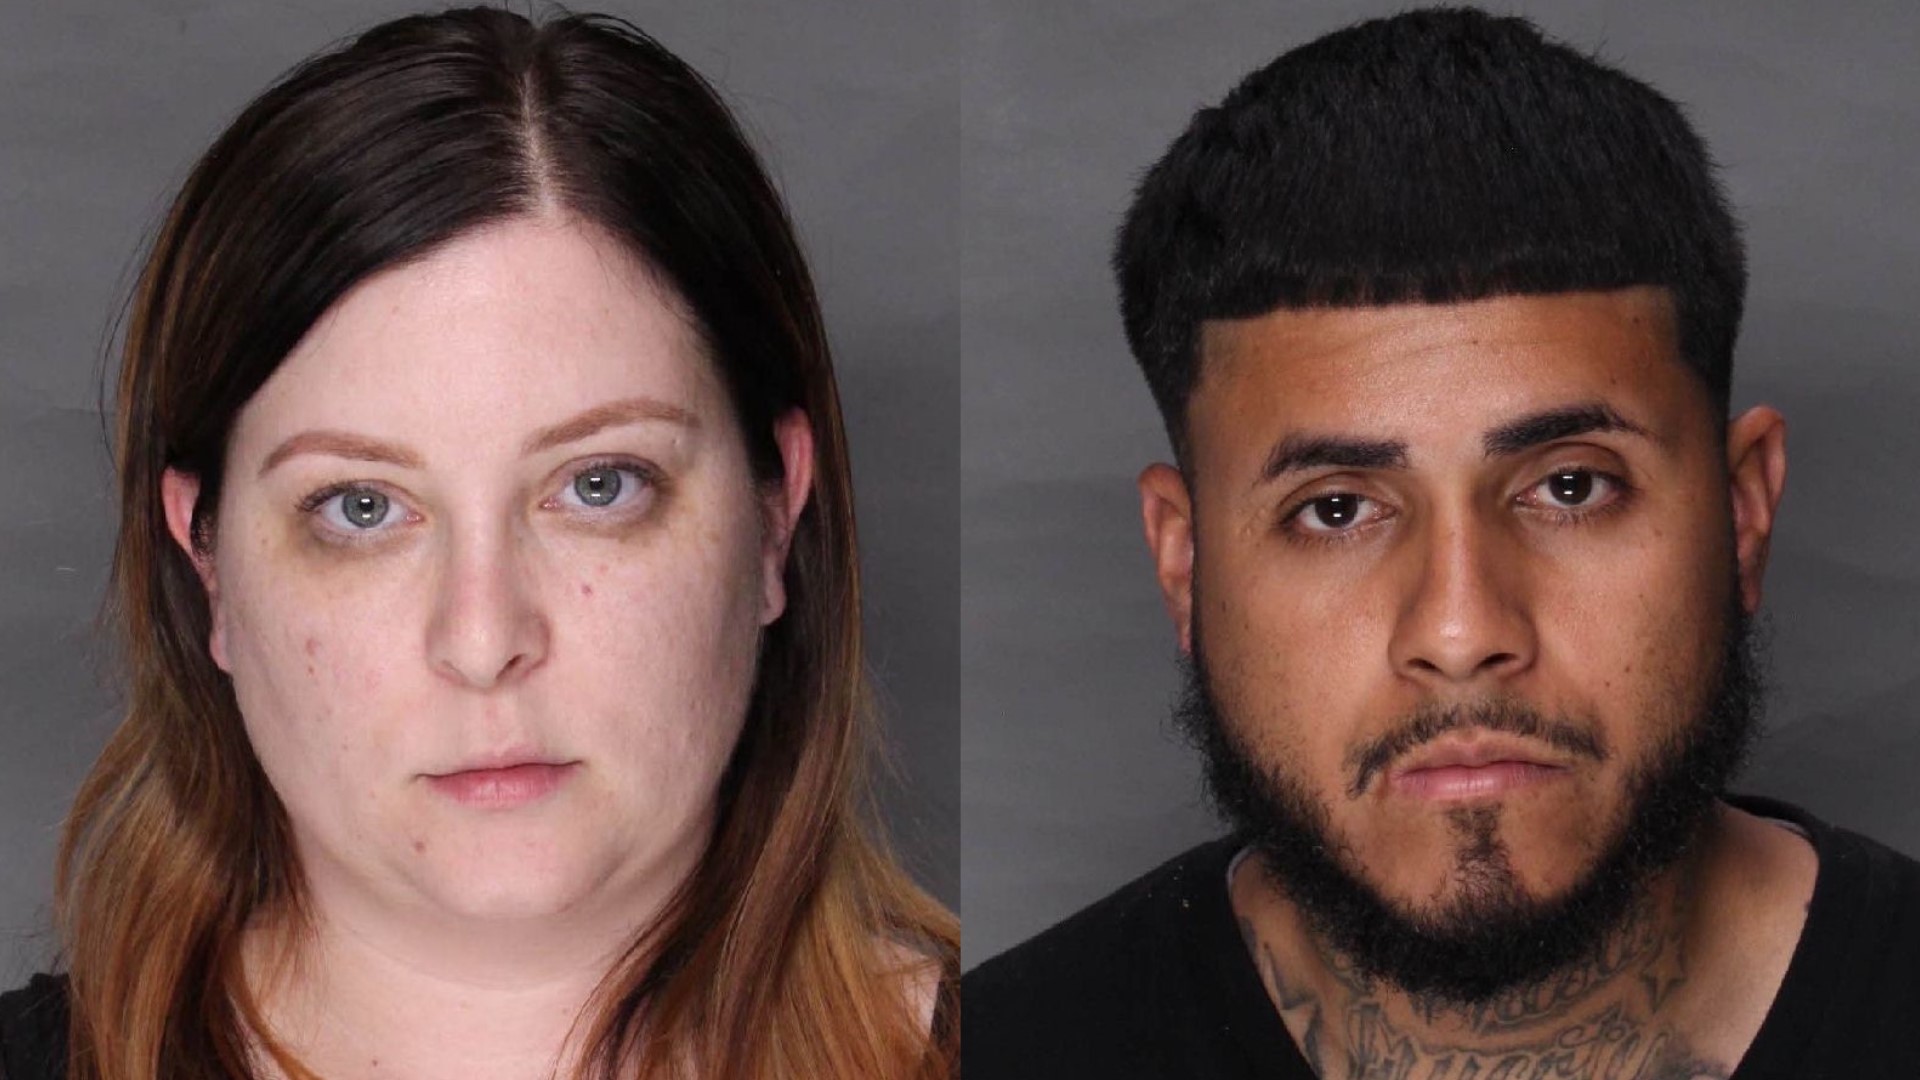 Ivan Rosero, 27, is facing multiple counts of homicide for his role in the Lebanon shootings. Tiffany Koziara, 34, is facing charges for hindering apprehension.